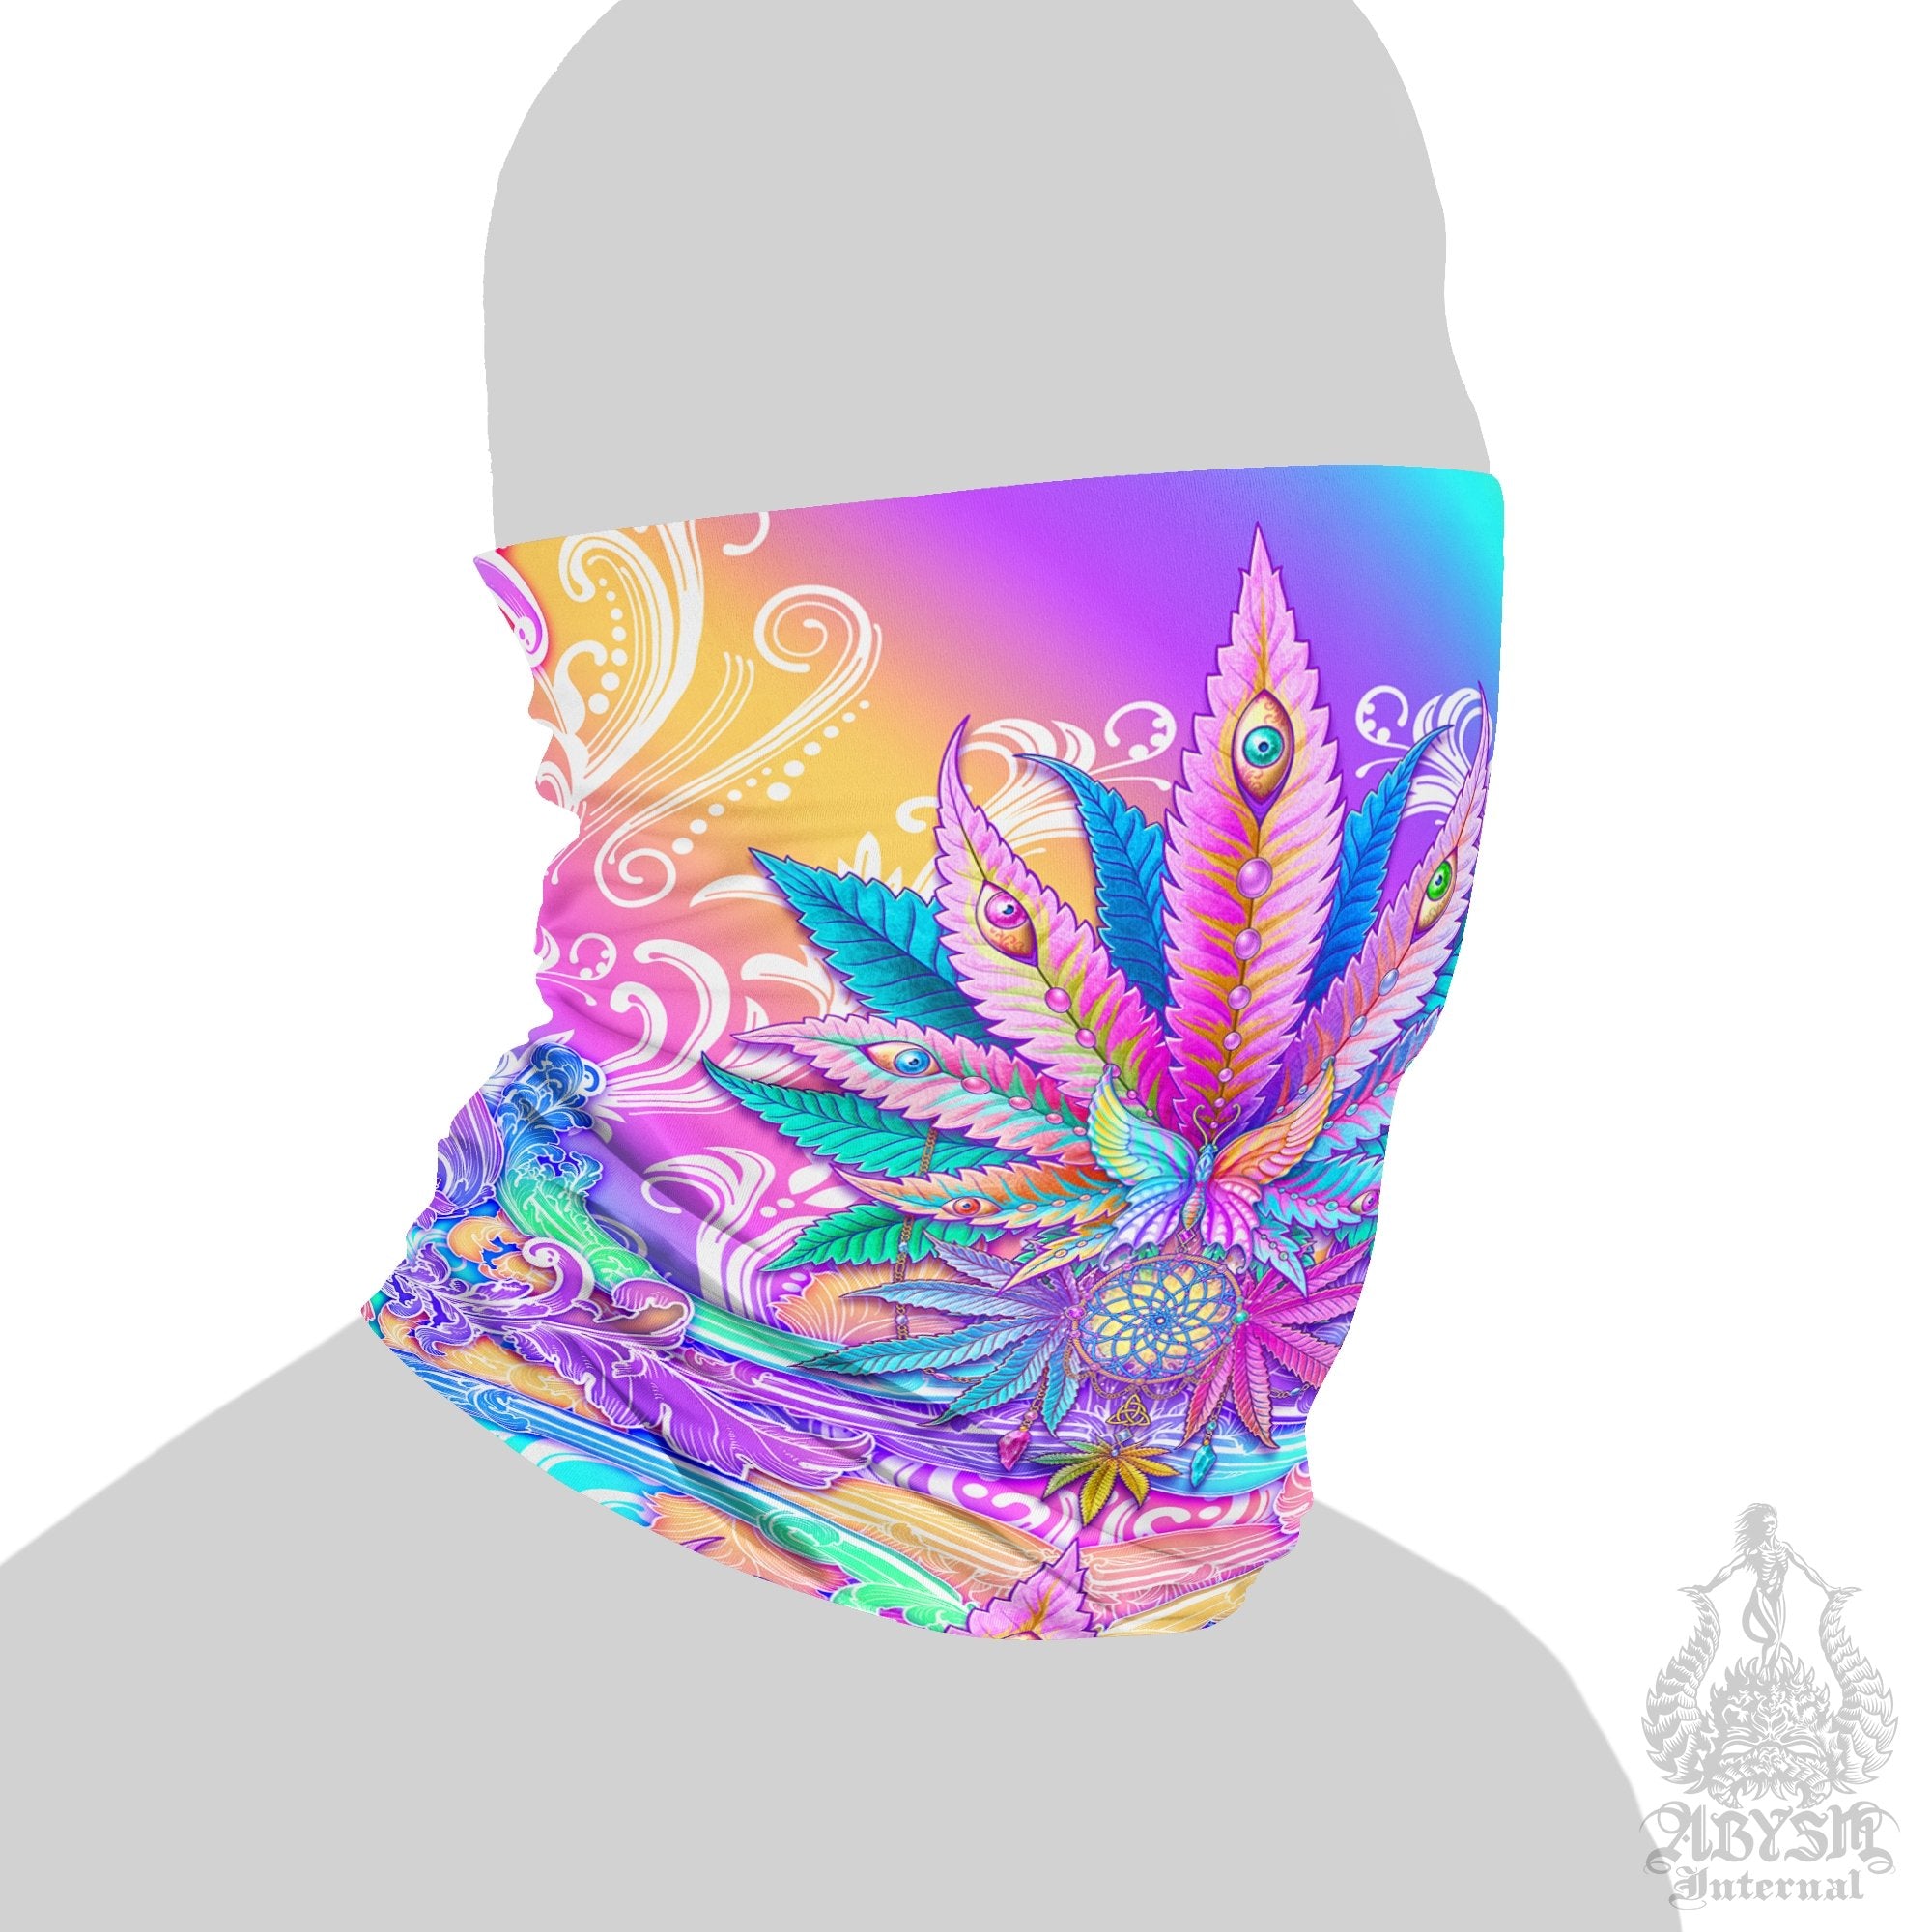 Pink Weed Neck Gaiter, Cannabis Face Mask, Pastel Marijuana Head Covering, Psychedelic Festival Outfit, 420 Gift - Aesthetic - Abysm Internal